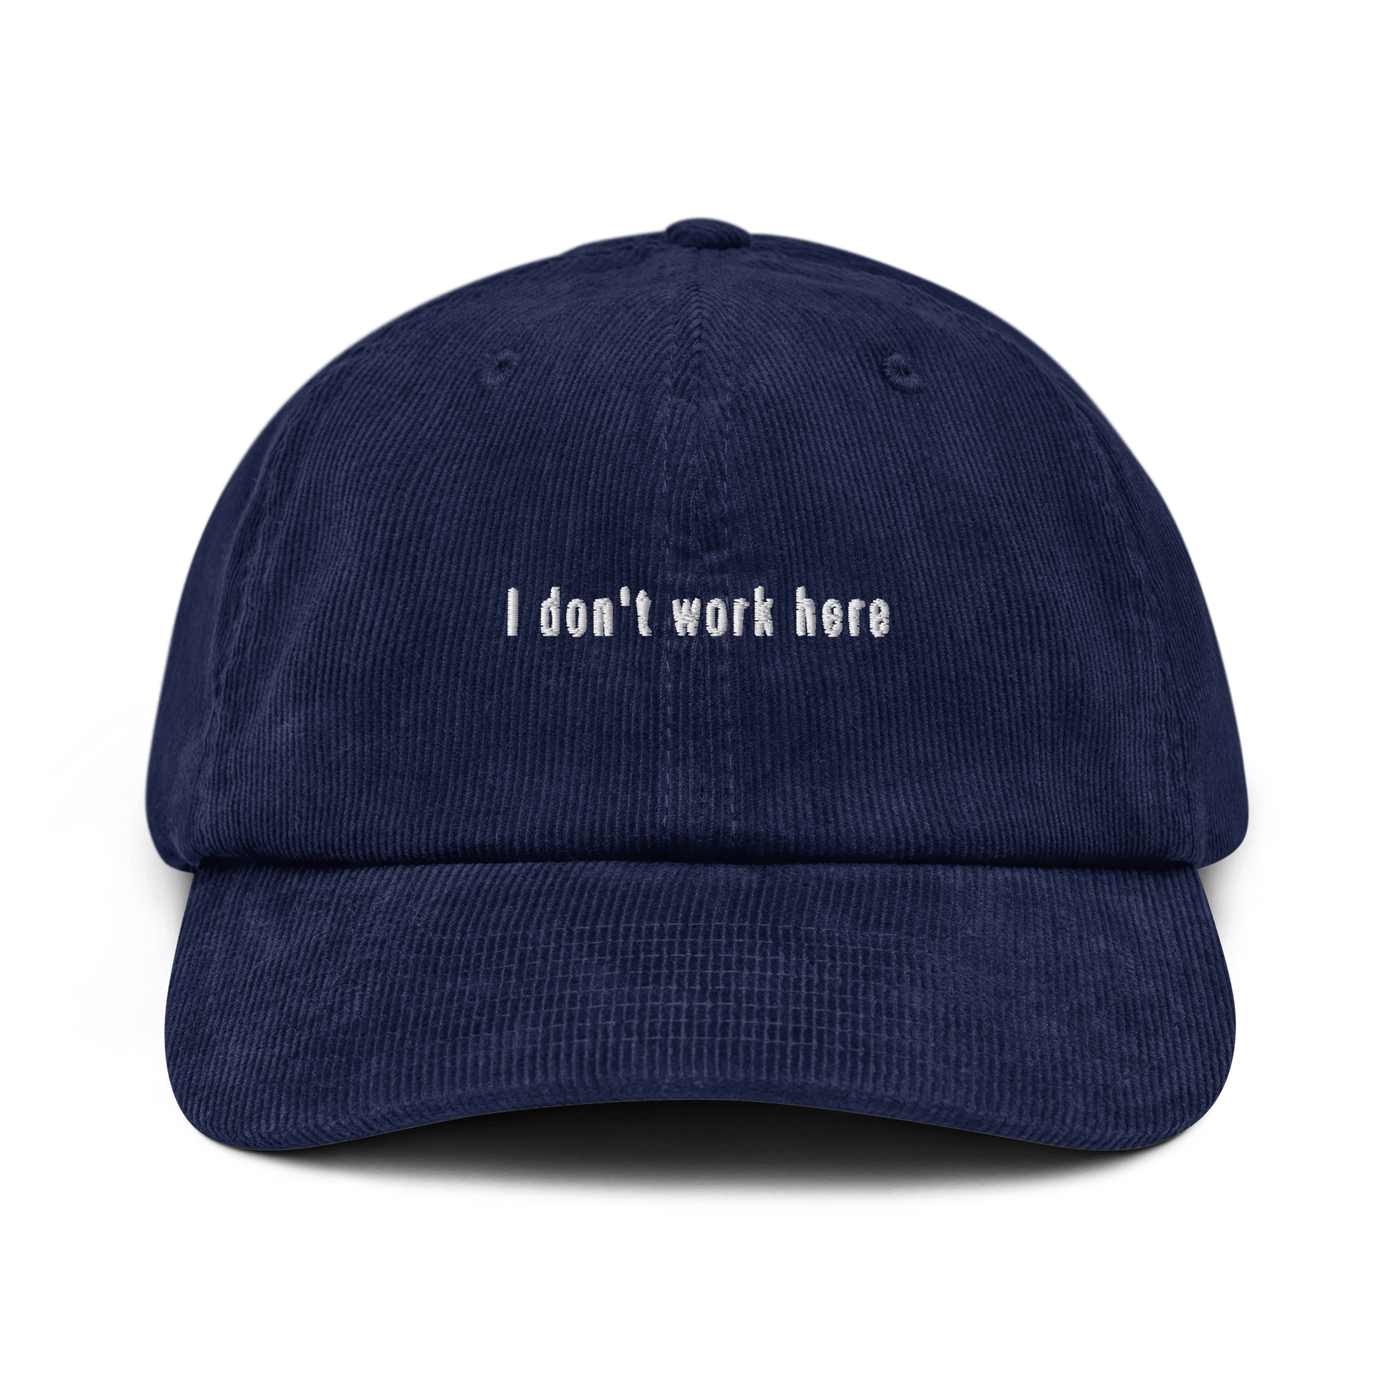 I don't work here Corduroy hat - Oxford Navy - - Just Another Cap Store